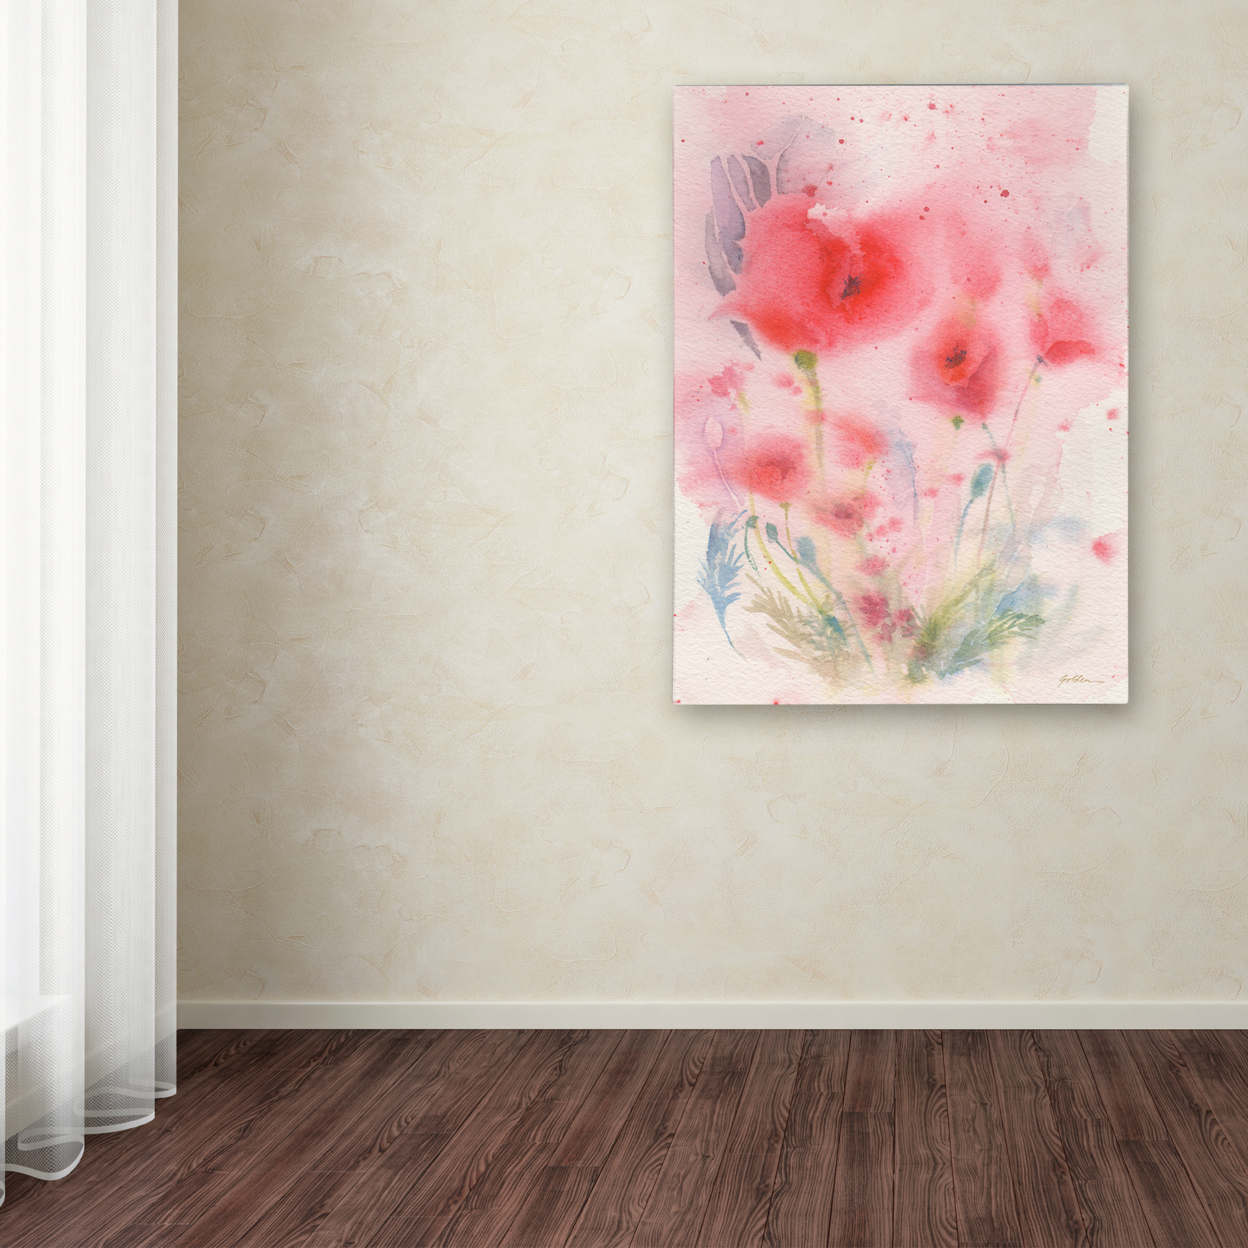 Sheila Golden 'Pink Reverie' Canvas Wall Art 35 X 47 Inches